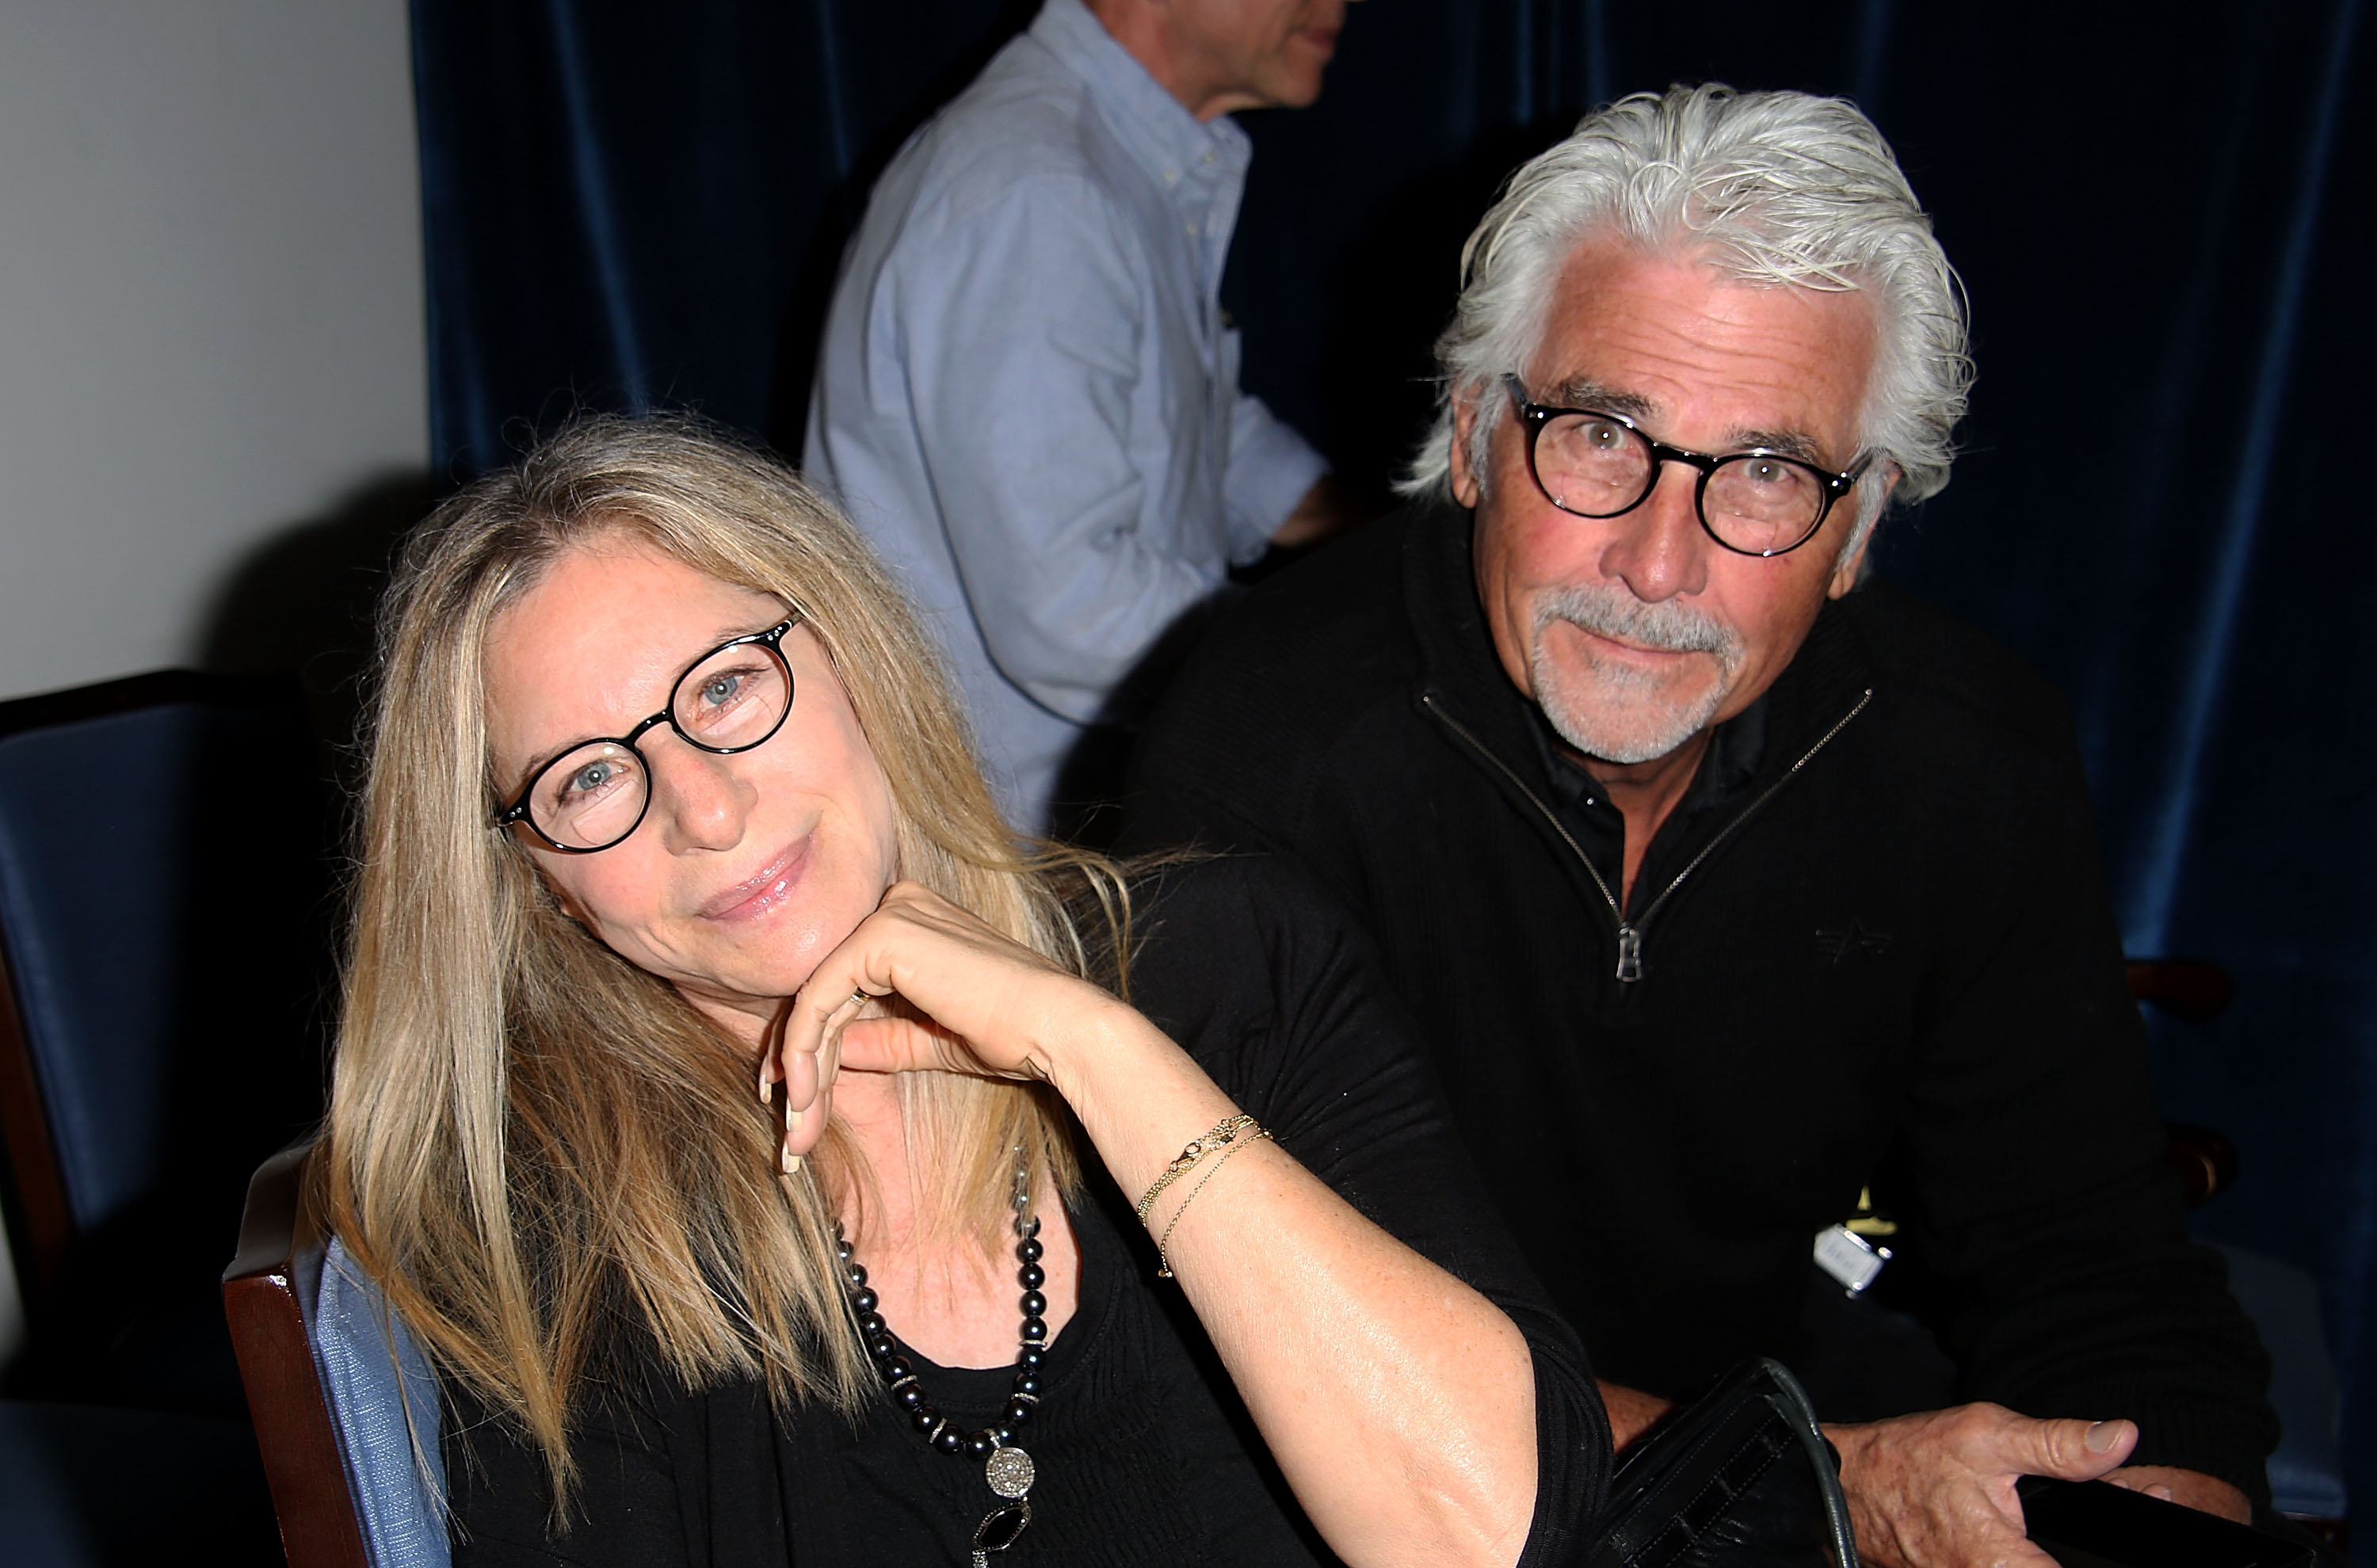 Barbra Streisand and James Brolin on July 6, 2014 in East Hampton, New York. | Source: Getty Images